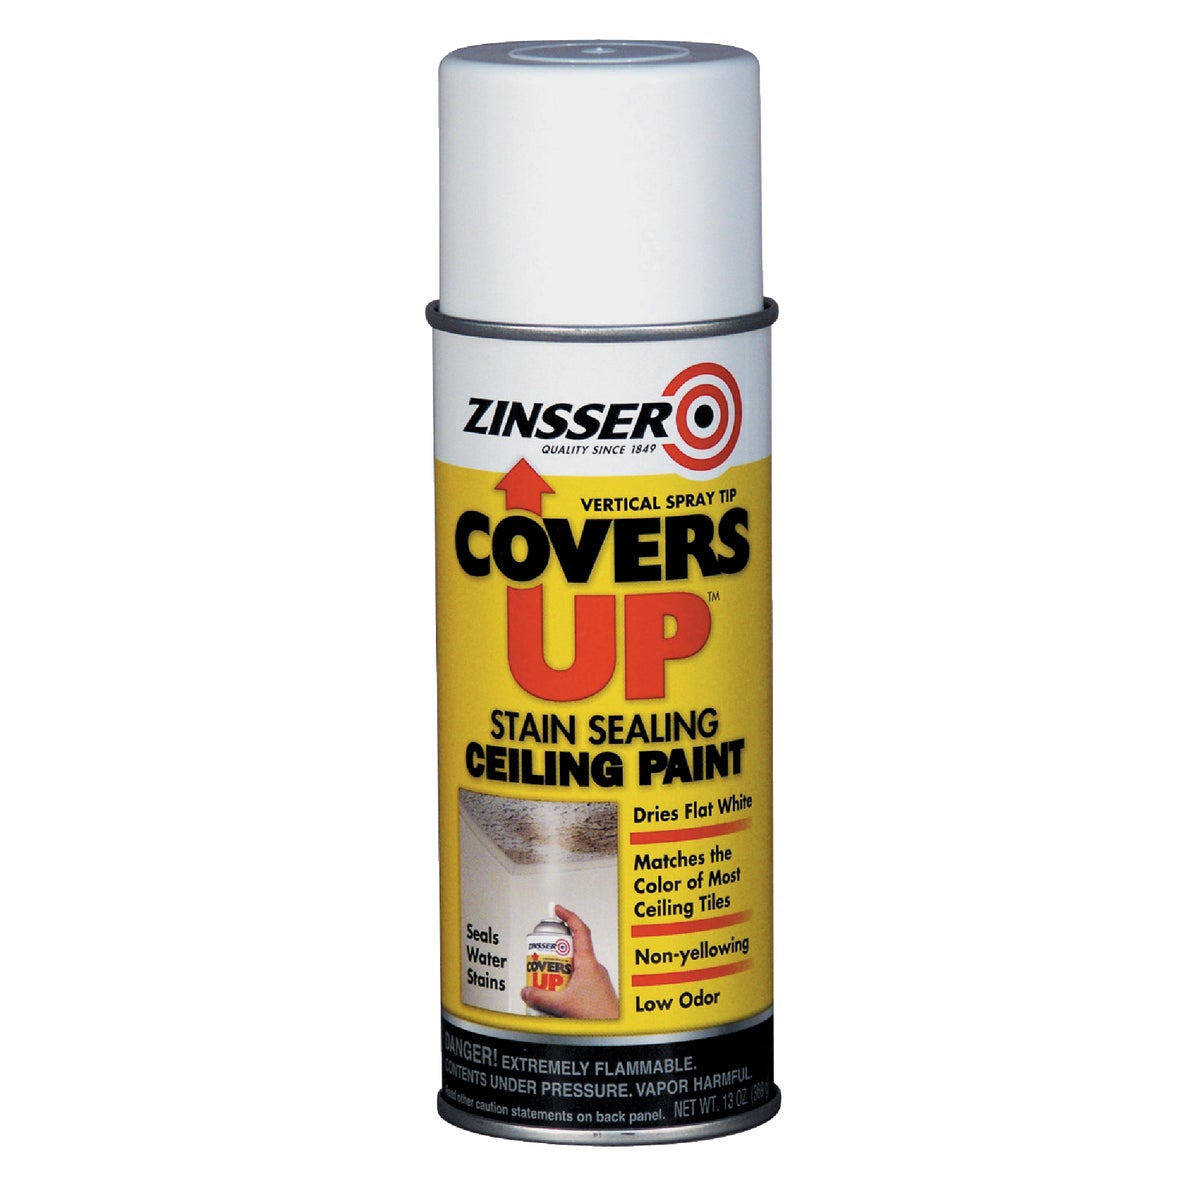 Zinsser COVERS UP Stain Sealing Spray Paint Primer, White, 13 Oz.